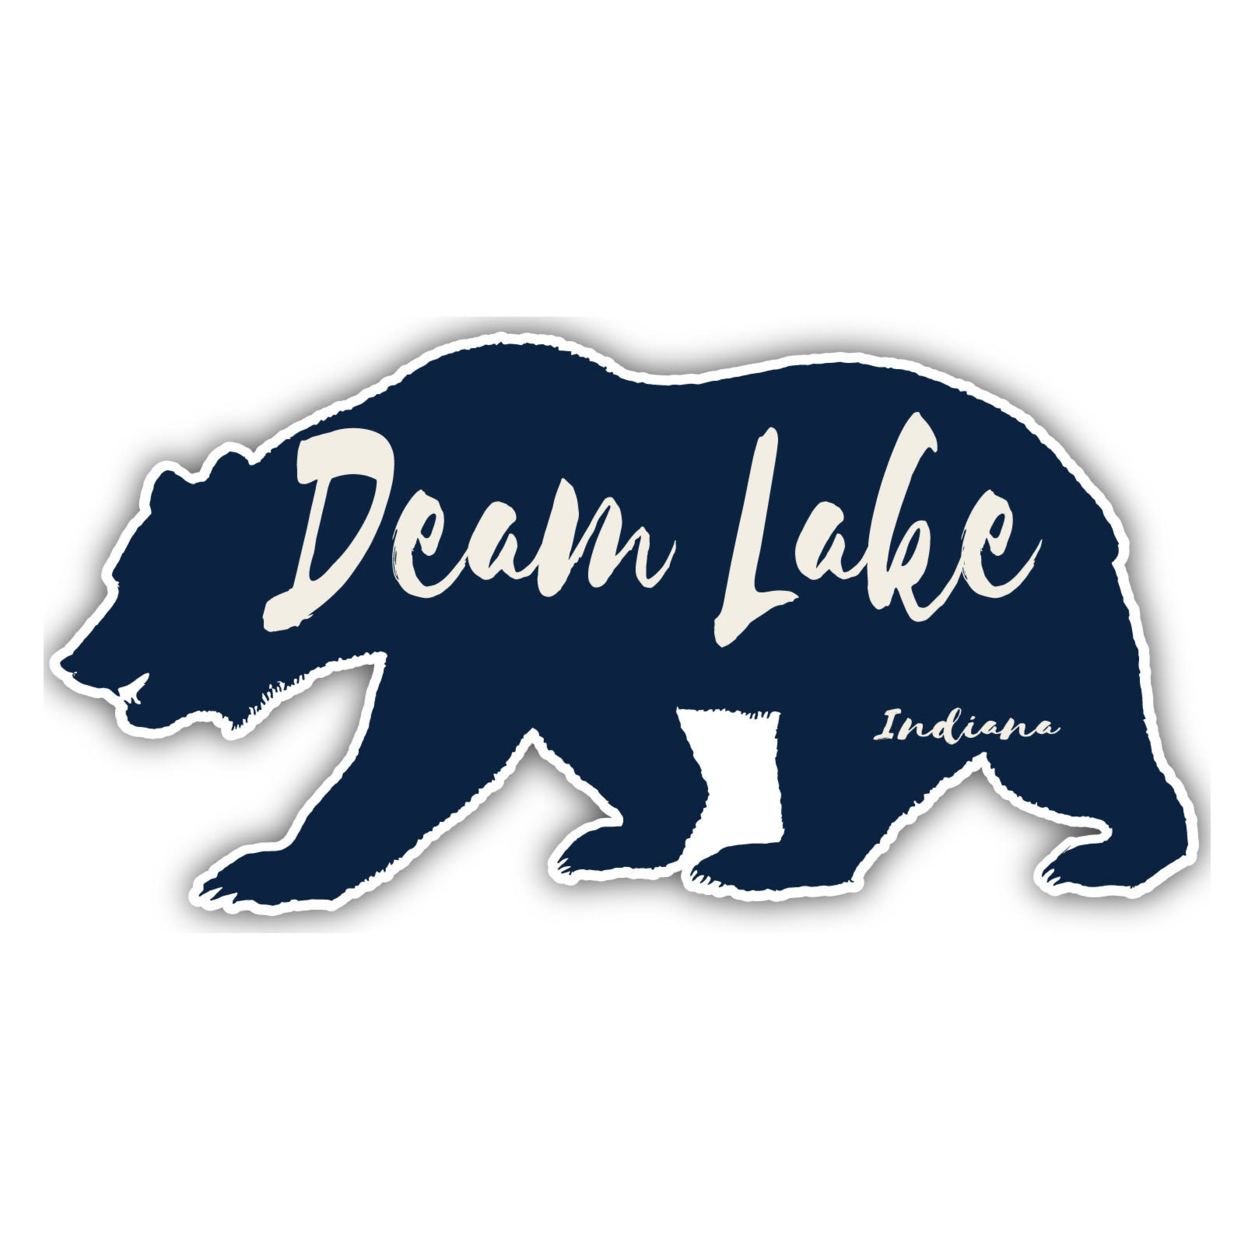 Deam Lake Indiana Souvenir Decorative Stickers (Choose Theme And Size) - Single Unit, 10-Inch, Great Outdoors